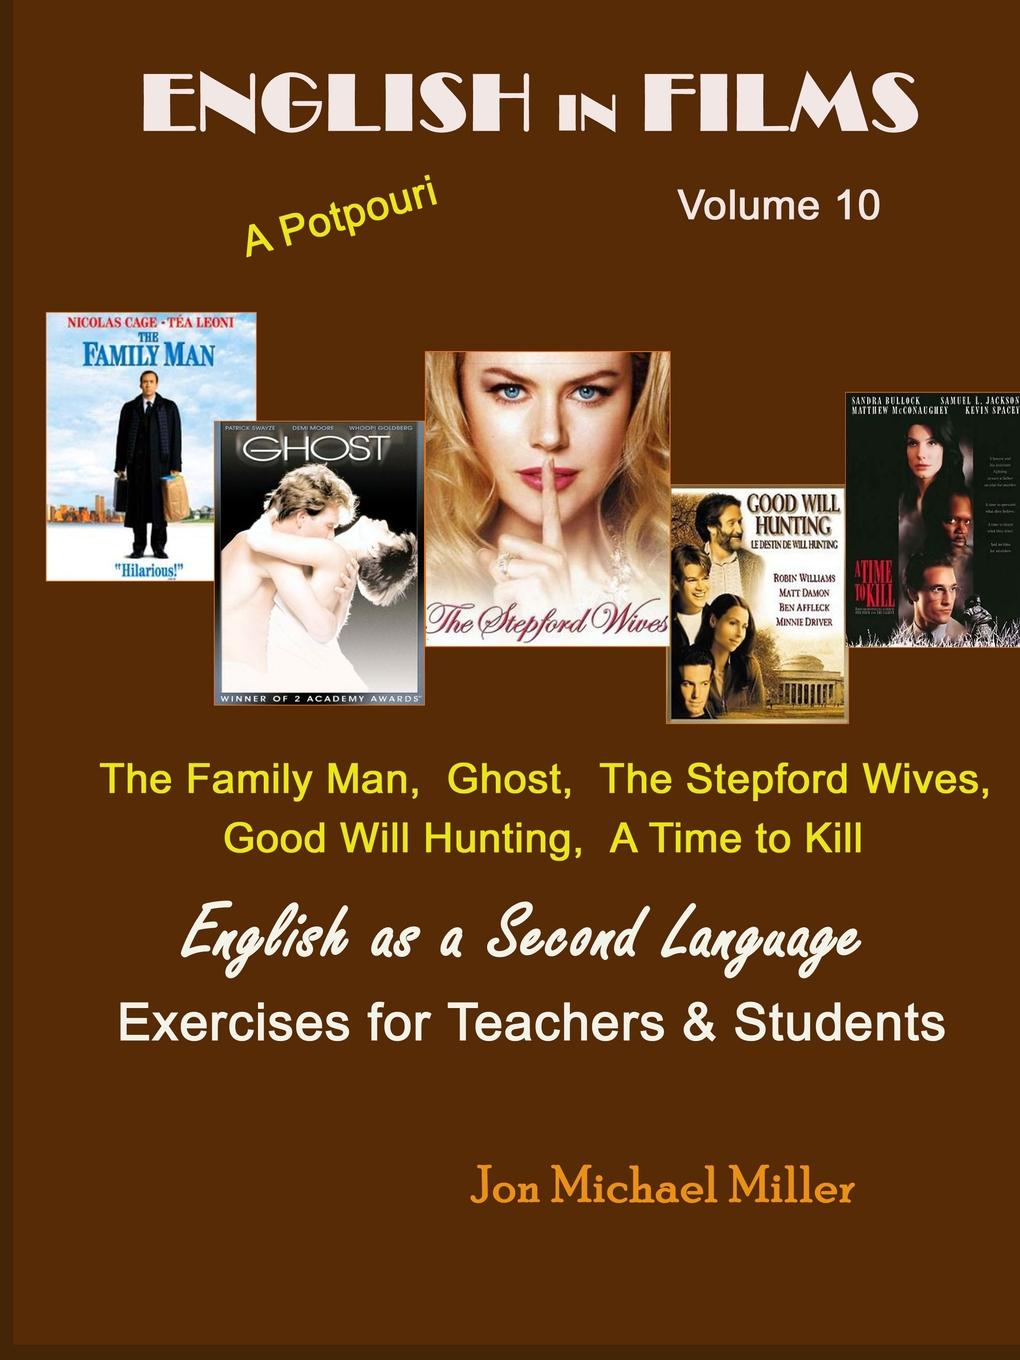 English in Films Volume 10. English as a Second Language